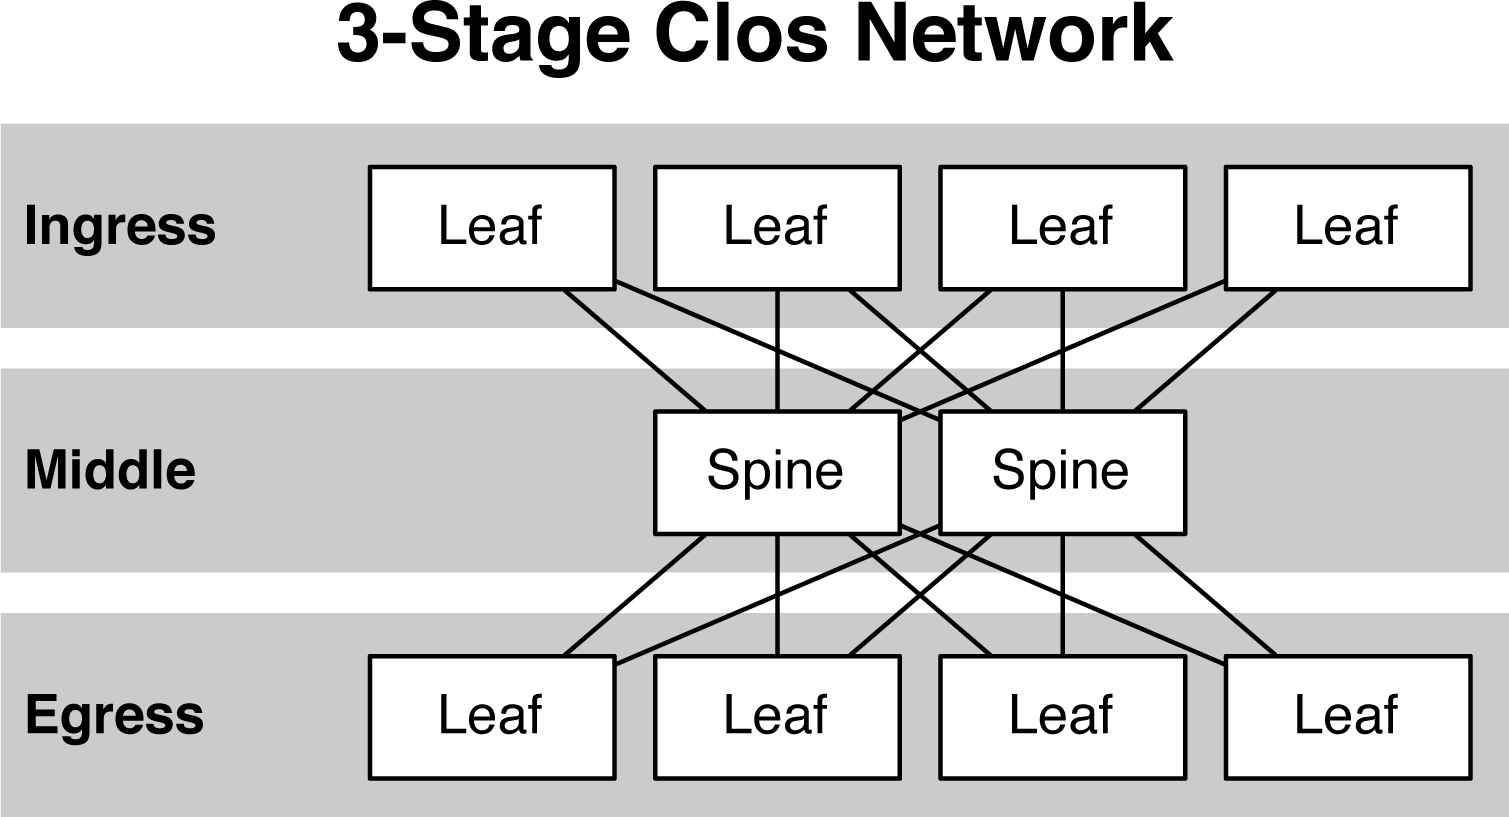 Architecture of Clos network